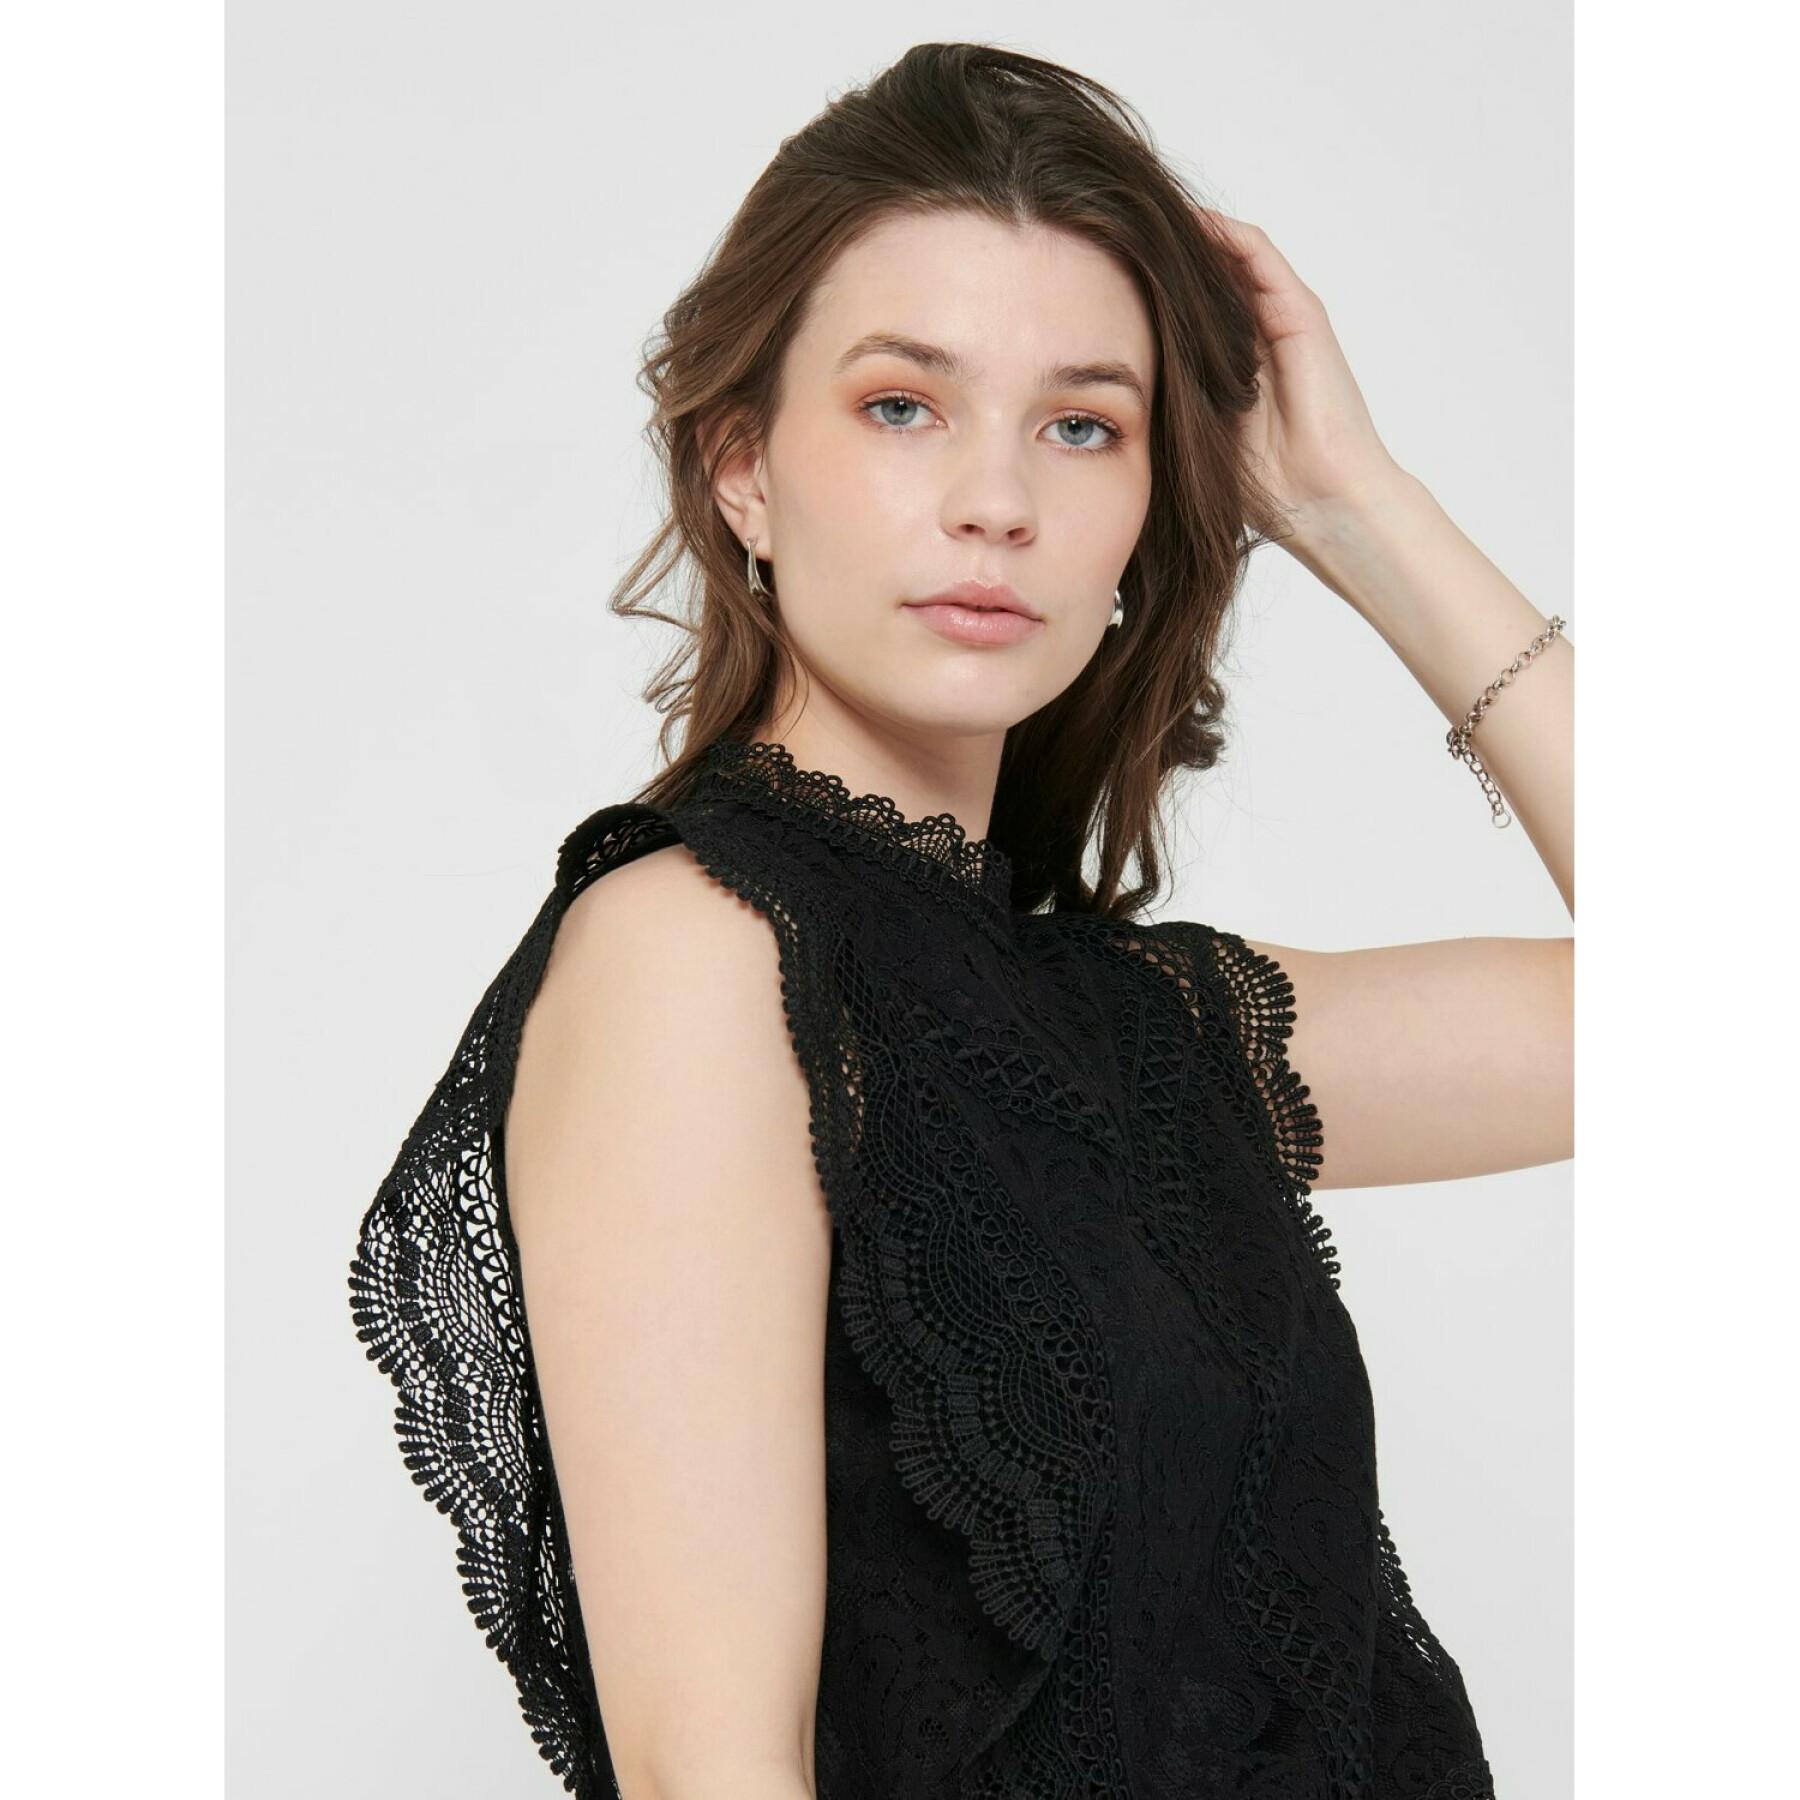 Women's sleeveless T-shirt Only lace wovens